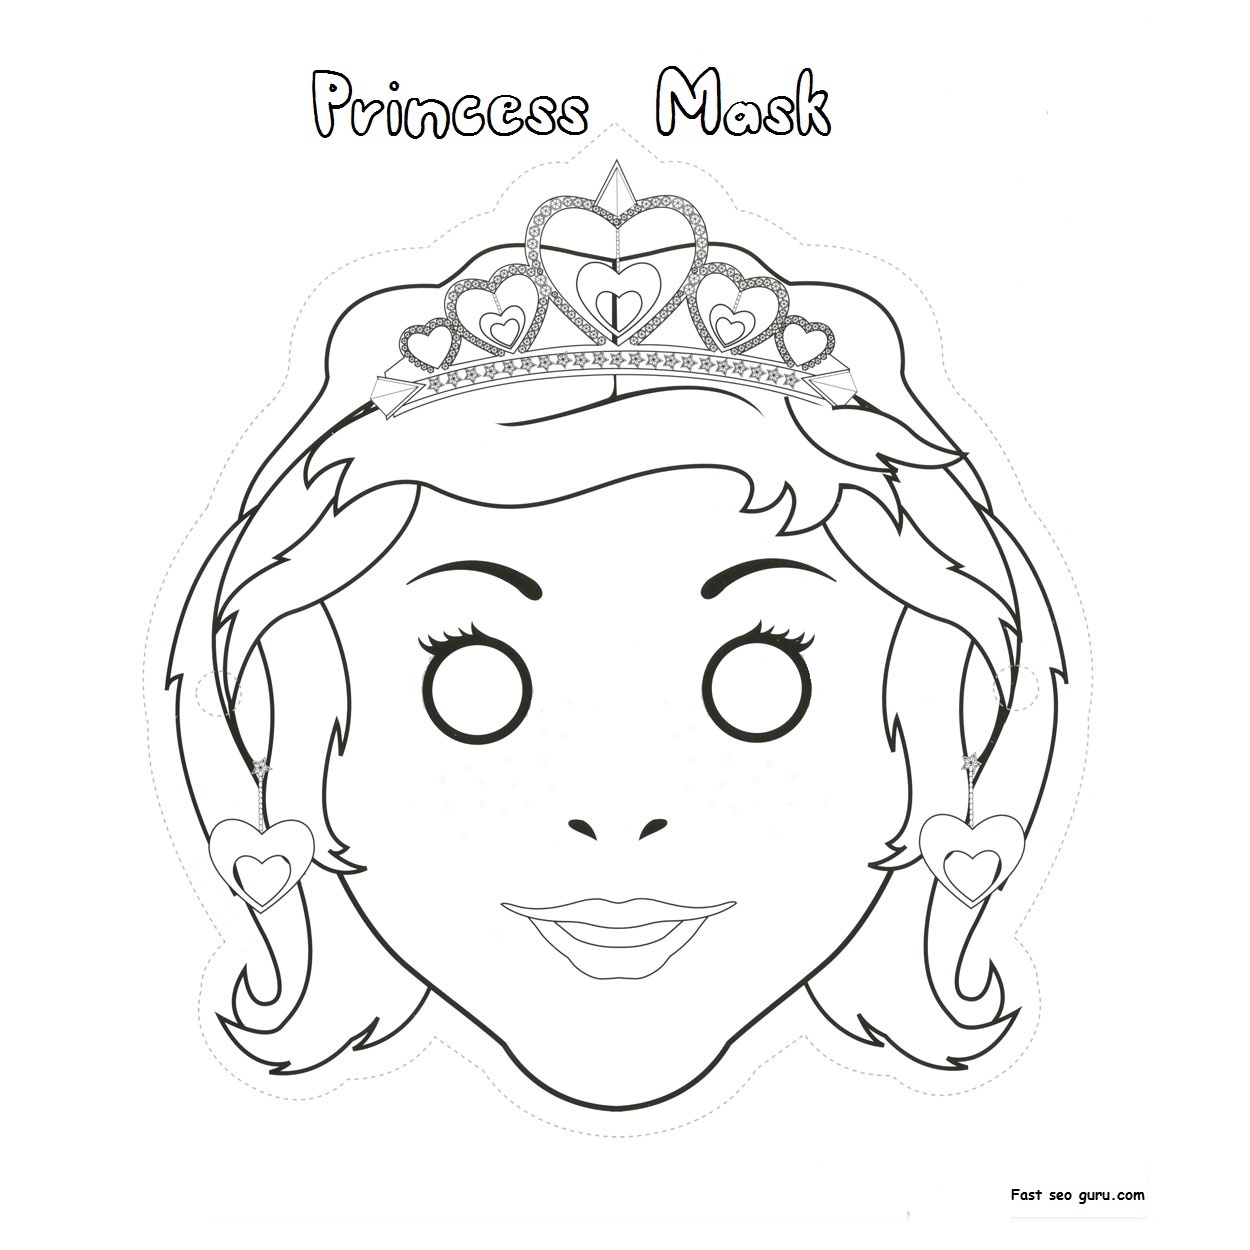 Printable cut out princess mask coloring in mask